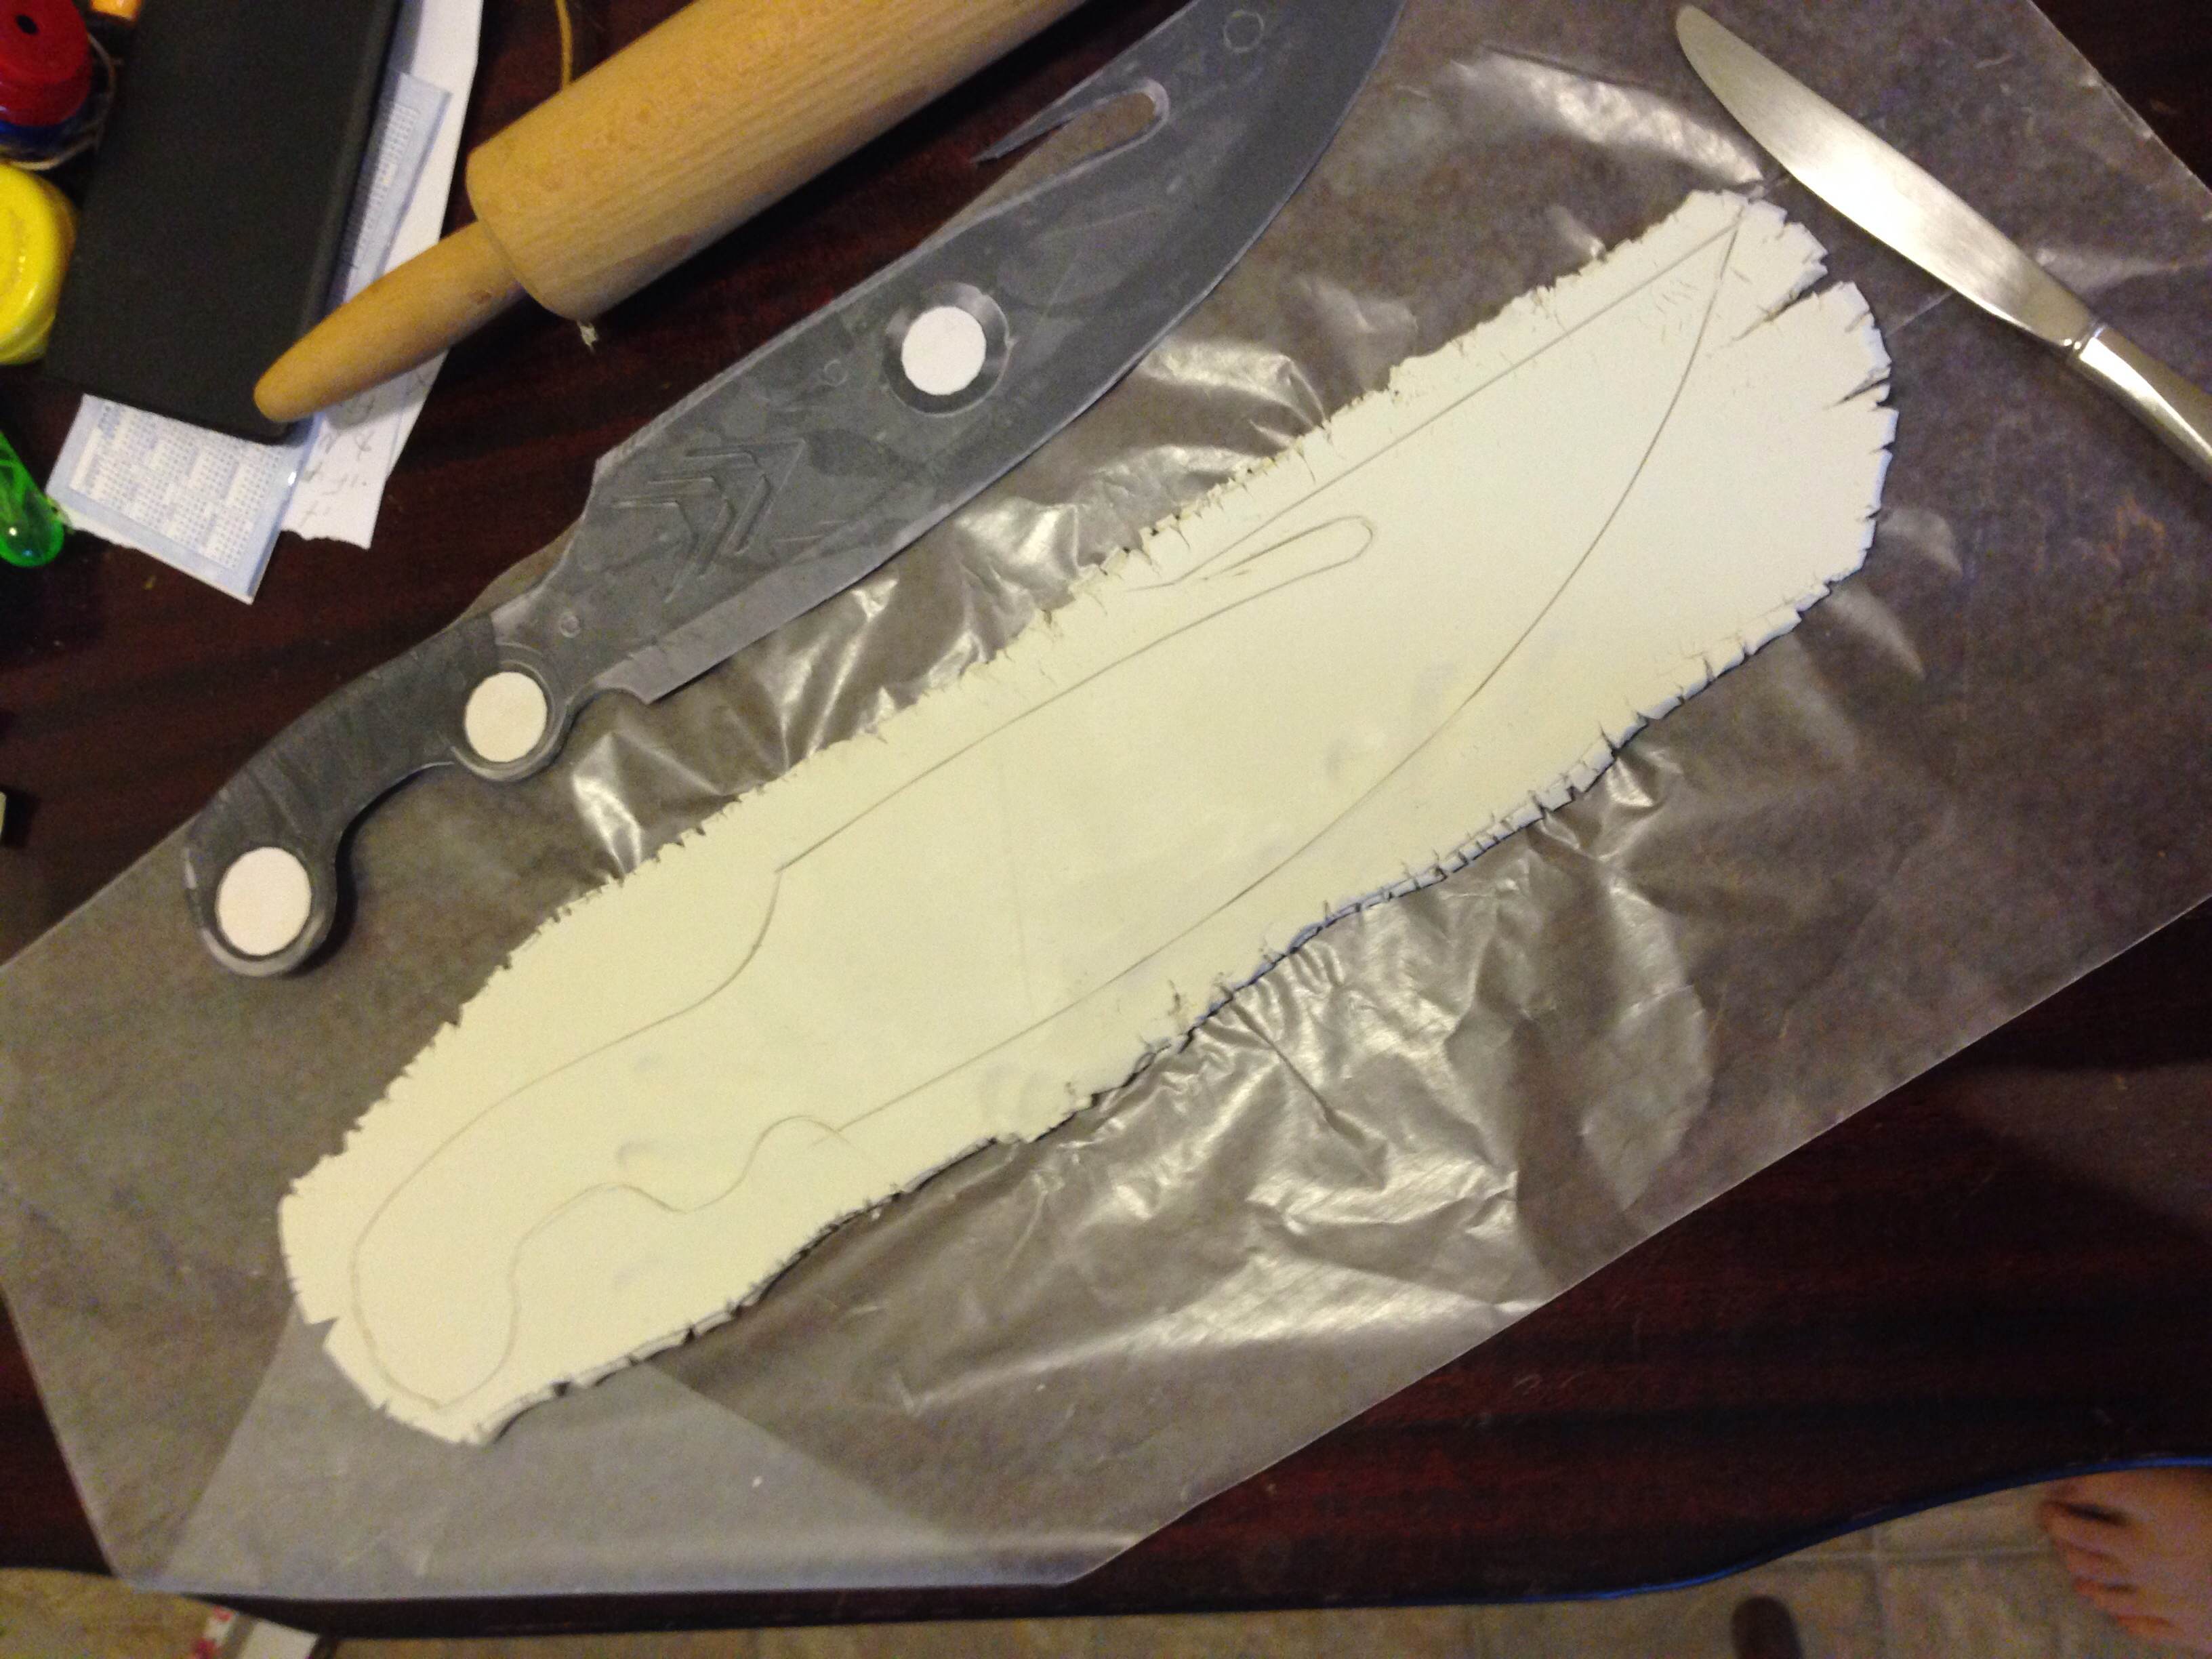 Sculpt start.  Rolled out some Sculpey and traced the knife onto it.